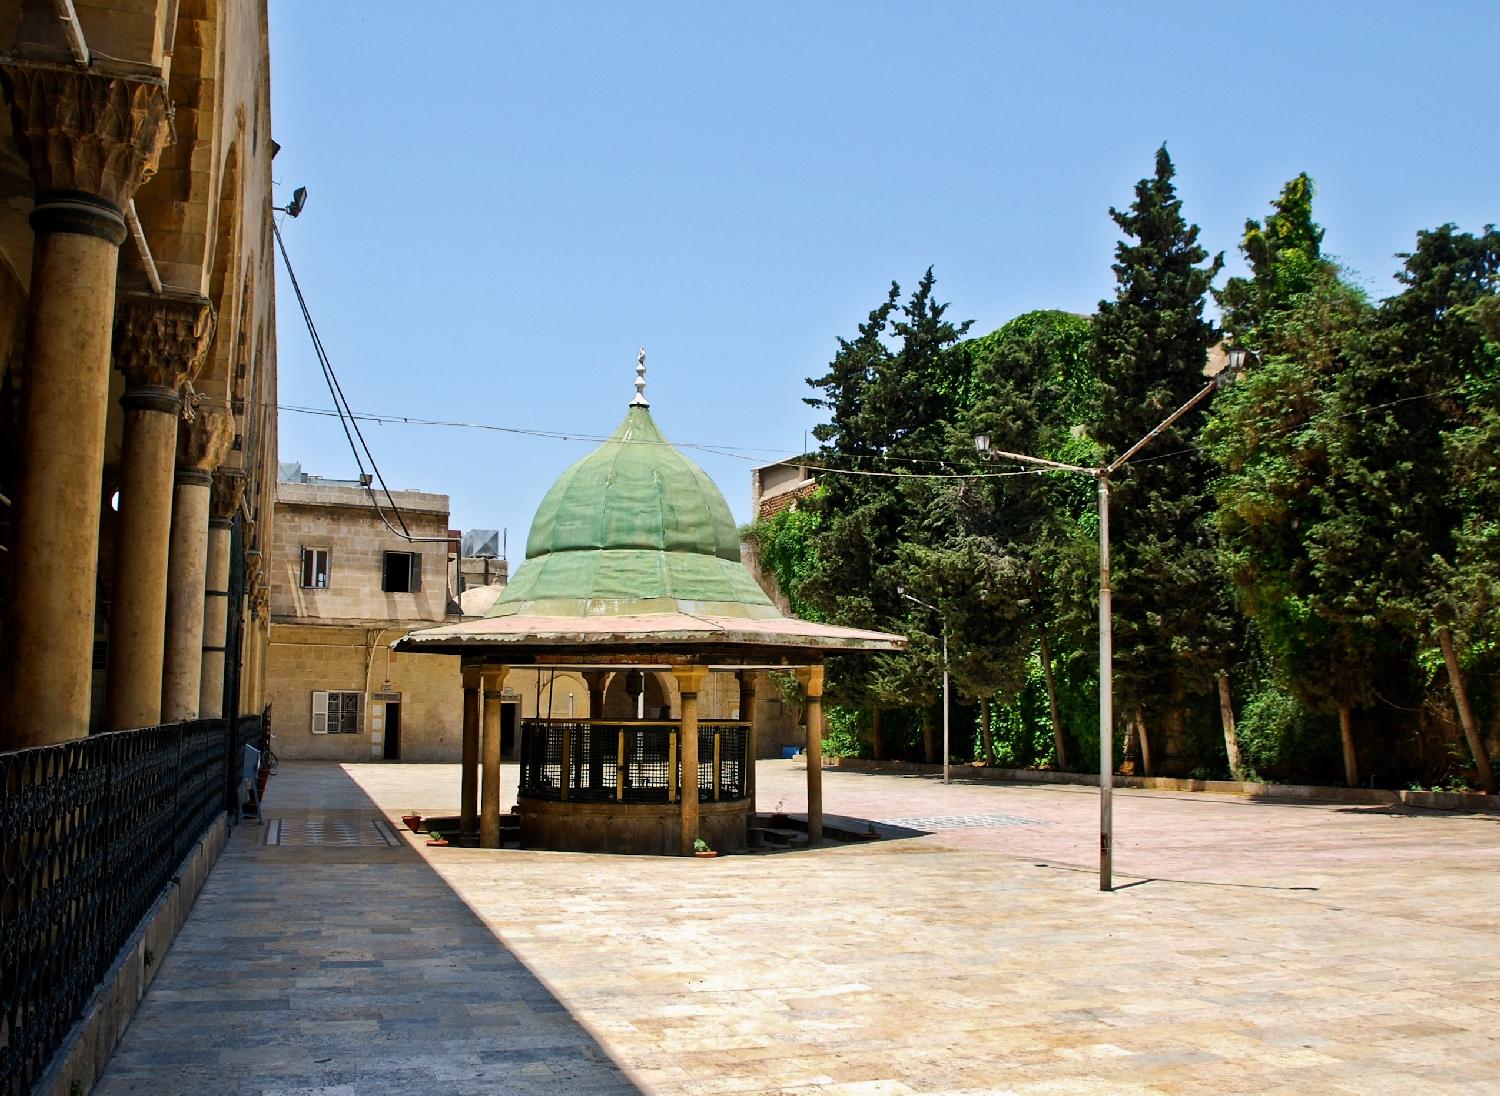 The green domed ablution fountain in the courtyard